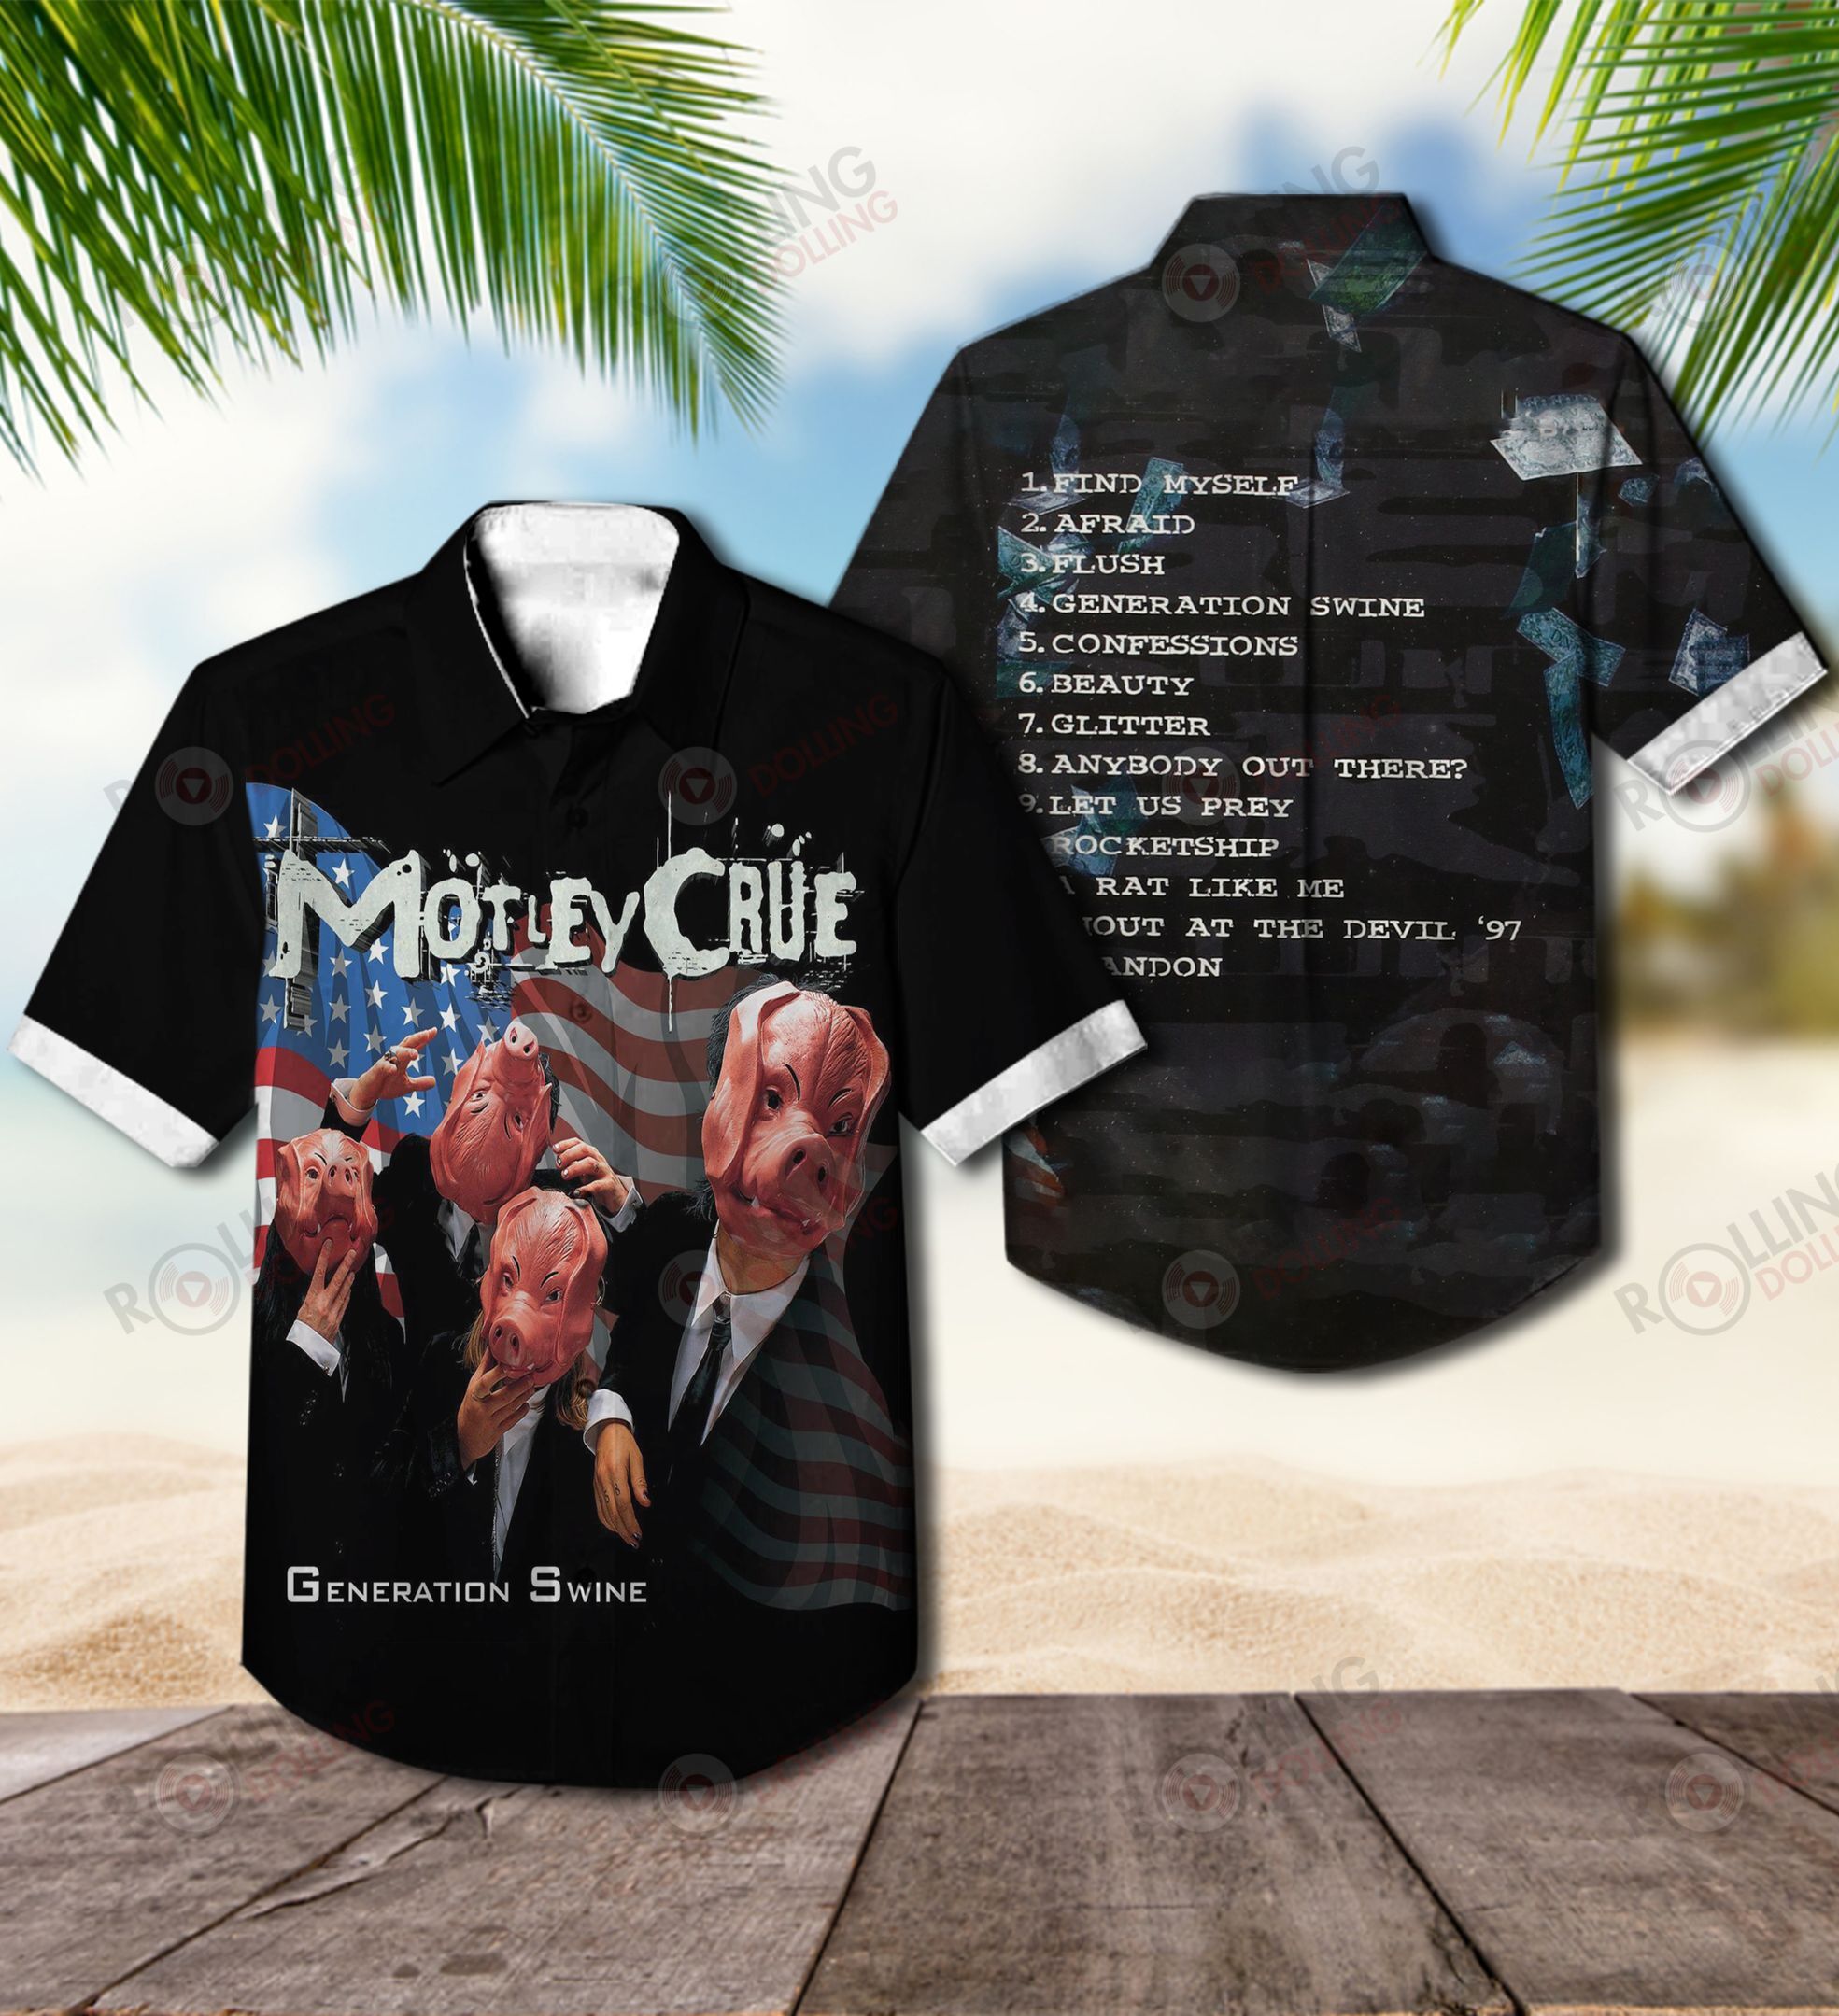 Check out these top 100+ Hawaiian shirt so cool for rock fans 233